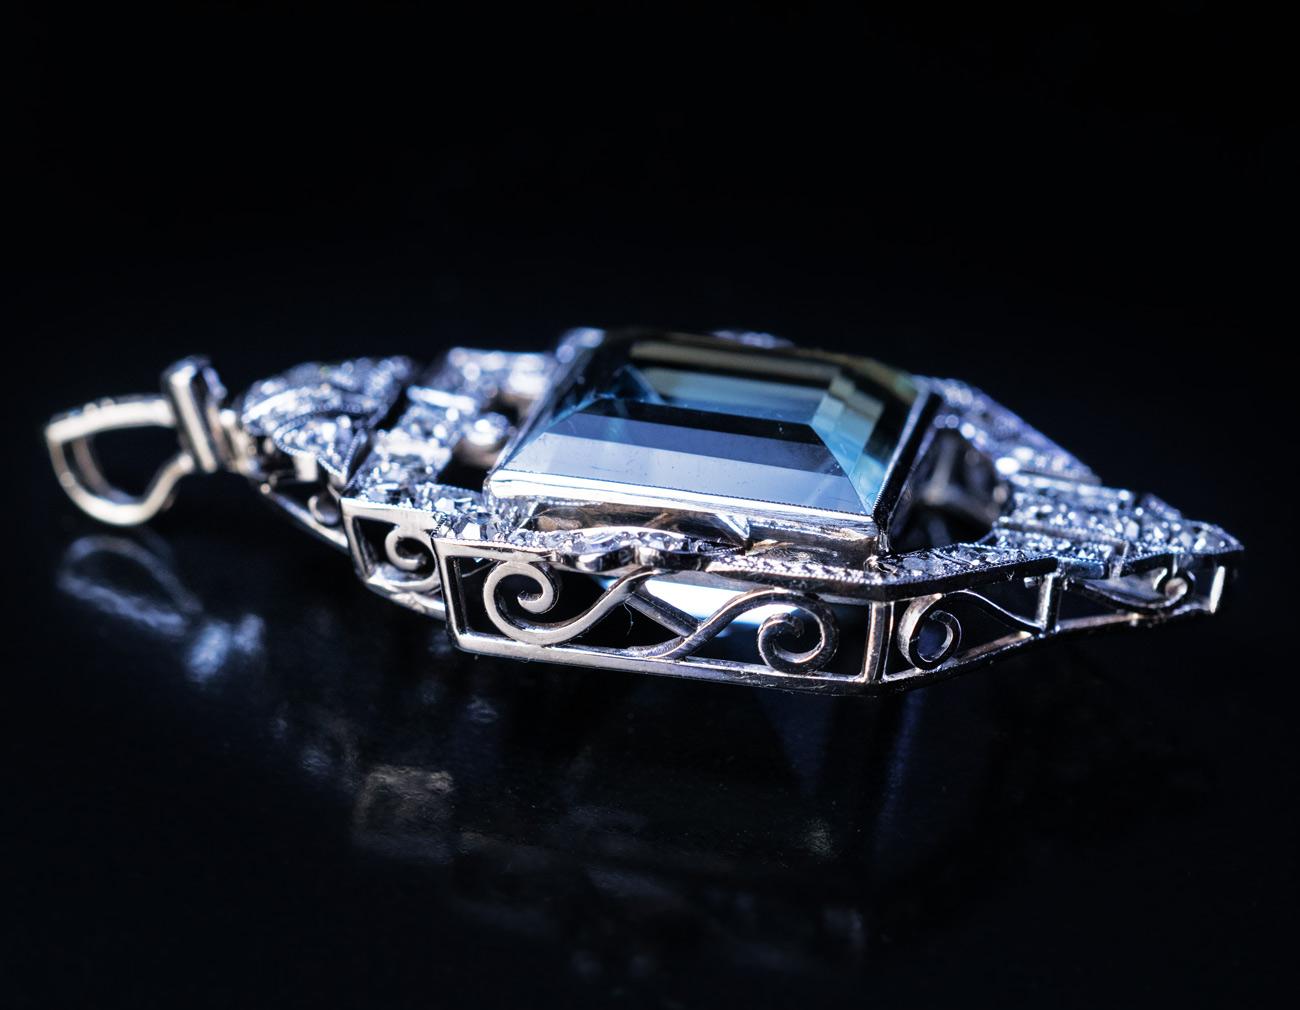 Austria, Vienna, circa 1930

This stylish vintage white 14K gold necklace features an excellent square step cut aquamarine surrounded by an ornate Art Deco geometric frame embellished with diamonds.
The aquamarine measures 14.18 x 14.17 x 10.87 mm